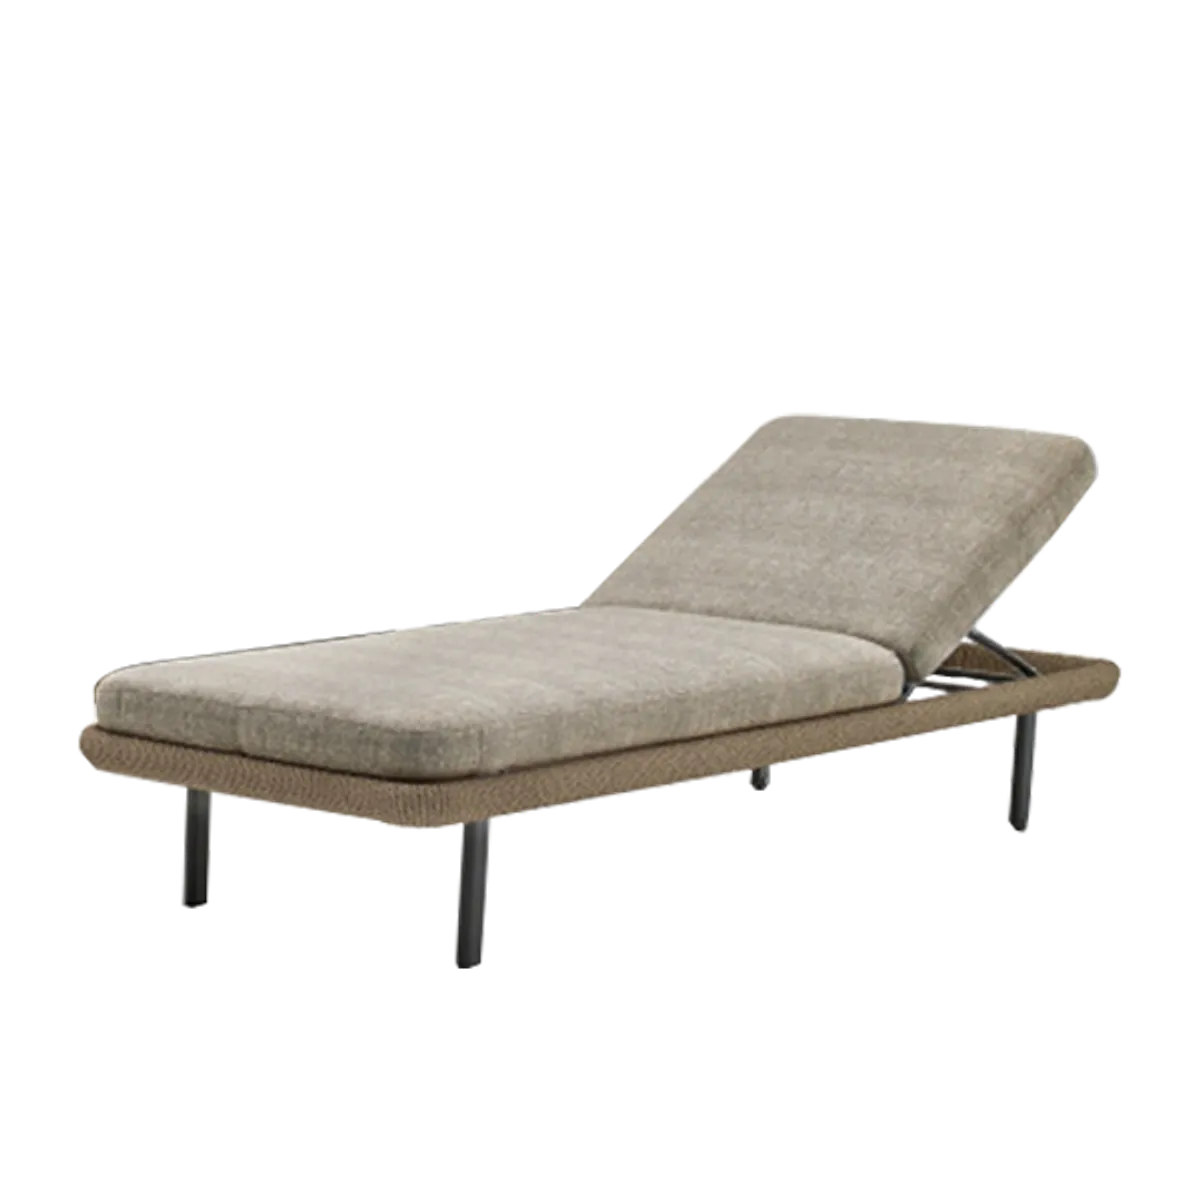 Web Babylon Daybed Outdoor Lounge Furniture For Poolside Cafes And Hotel Terraaces Insideoutcontracts 031